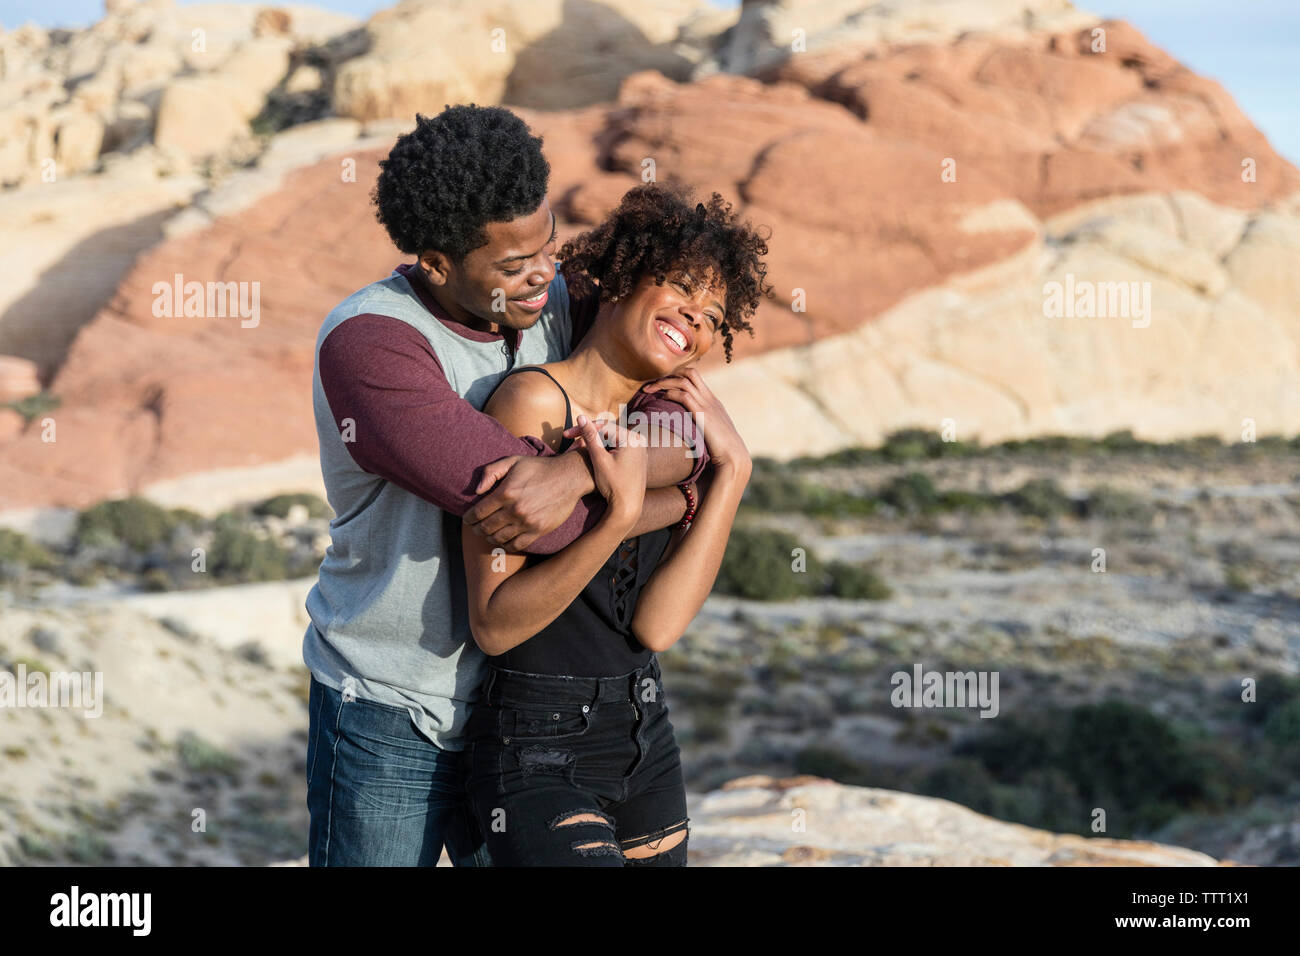 Romantic couple standing against rock formation Stock Photo